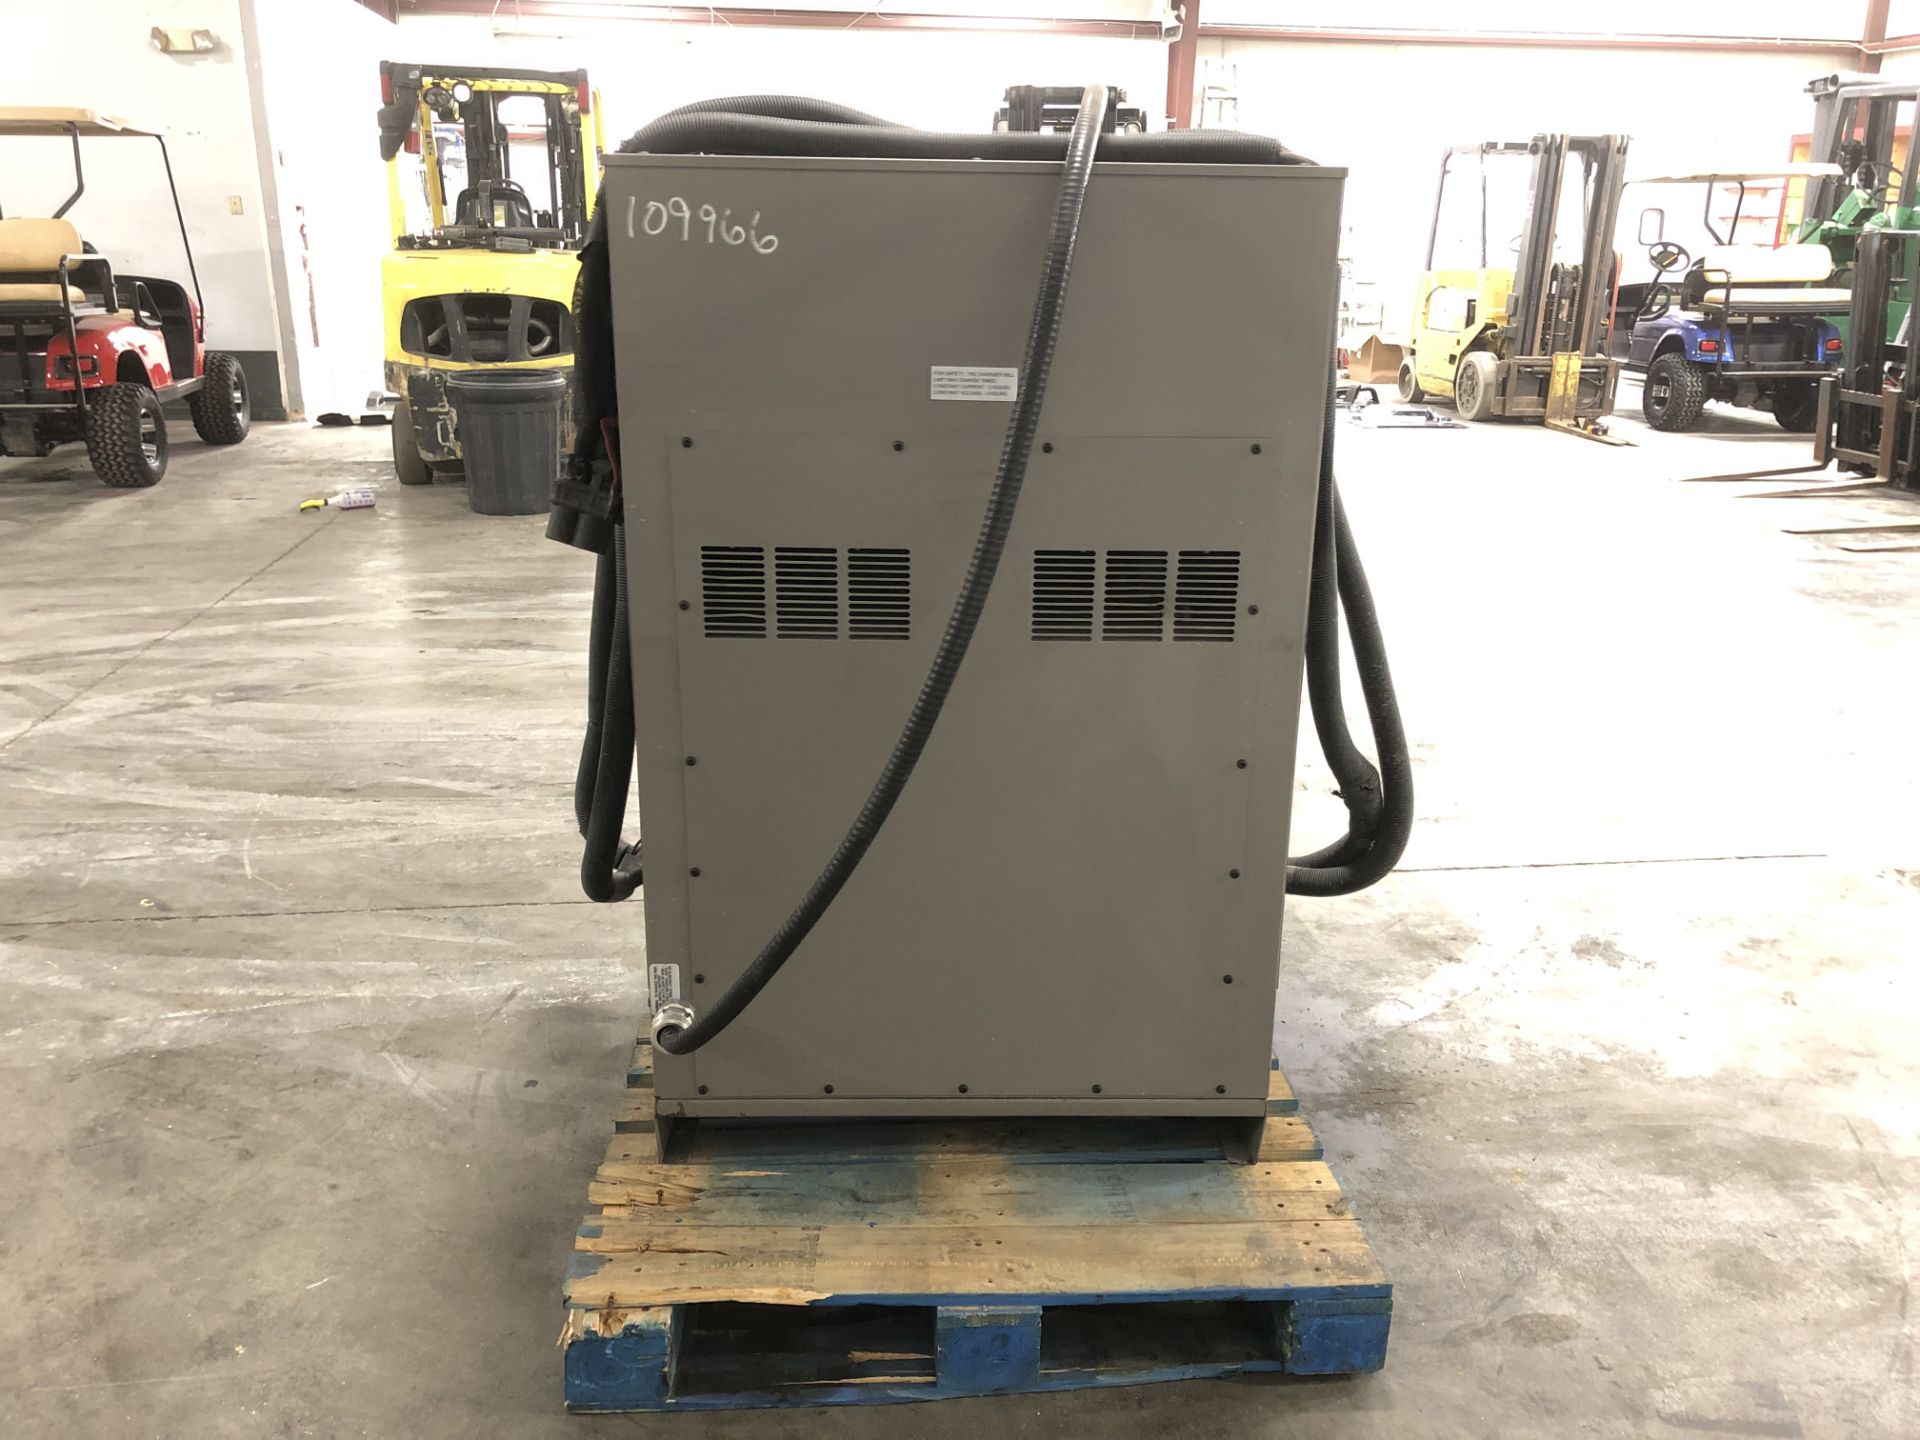 2014 ENERSYS EXPRESS MULTI-VOLT INDUSTRIAL BATTERY CHARGER, MODEL: TWINMAX 20, S/N: TM20N001828, - Image 3 of 5